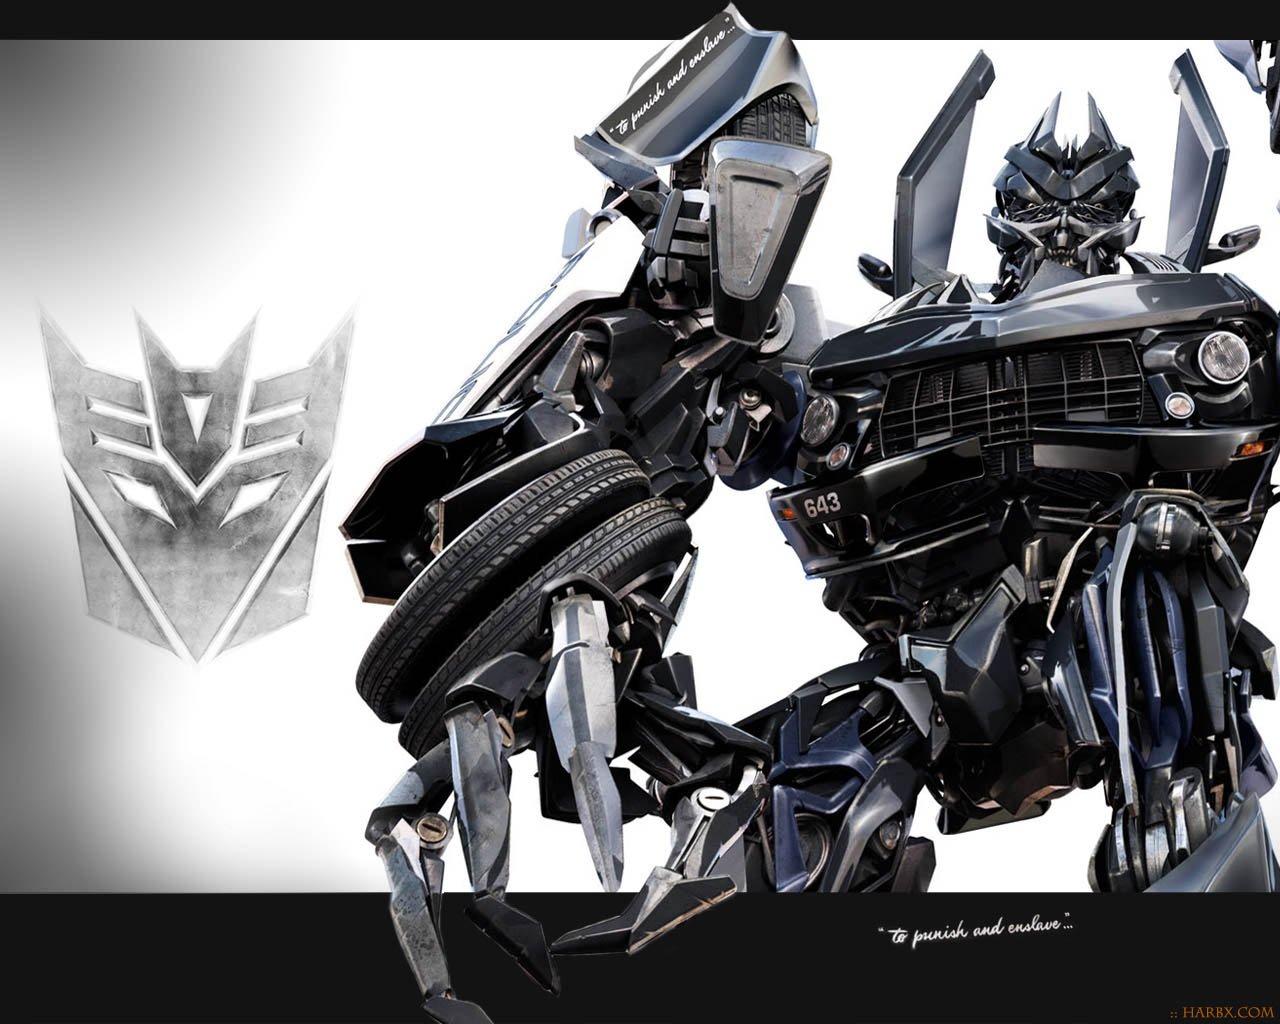 16 Powerful Transformers Images For Your Desktop